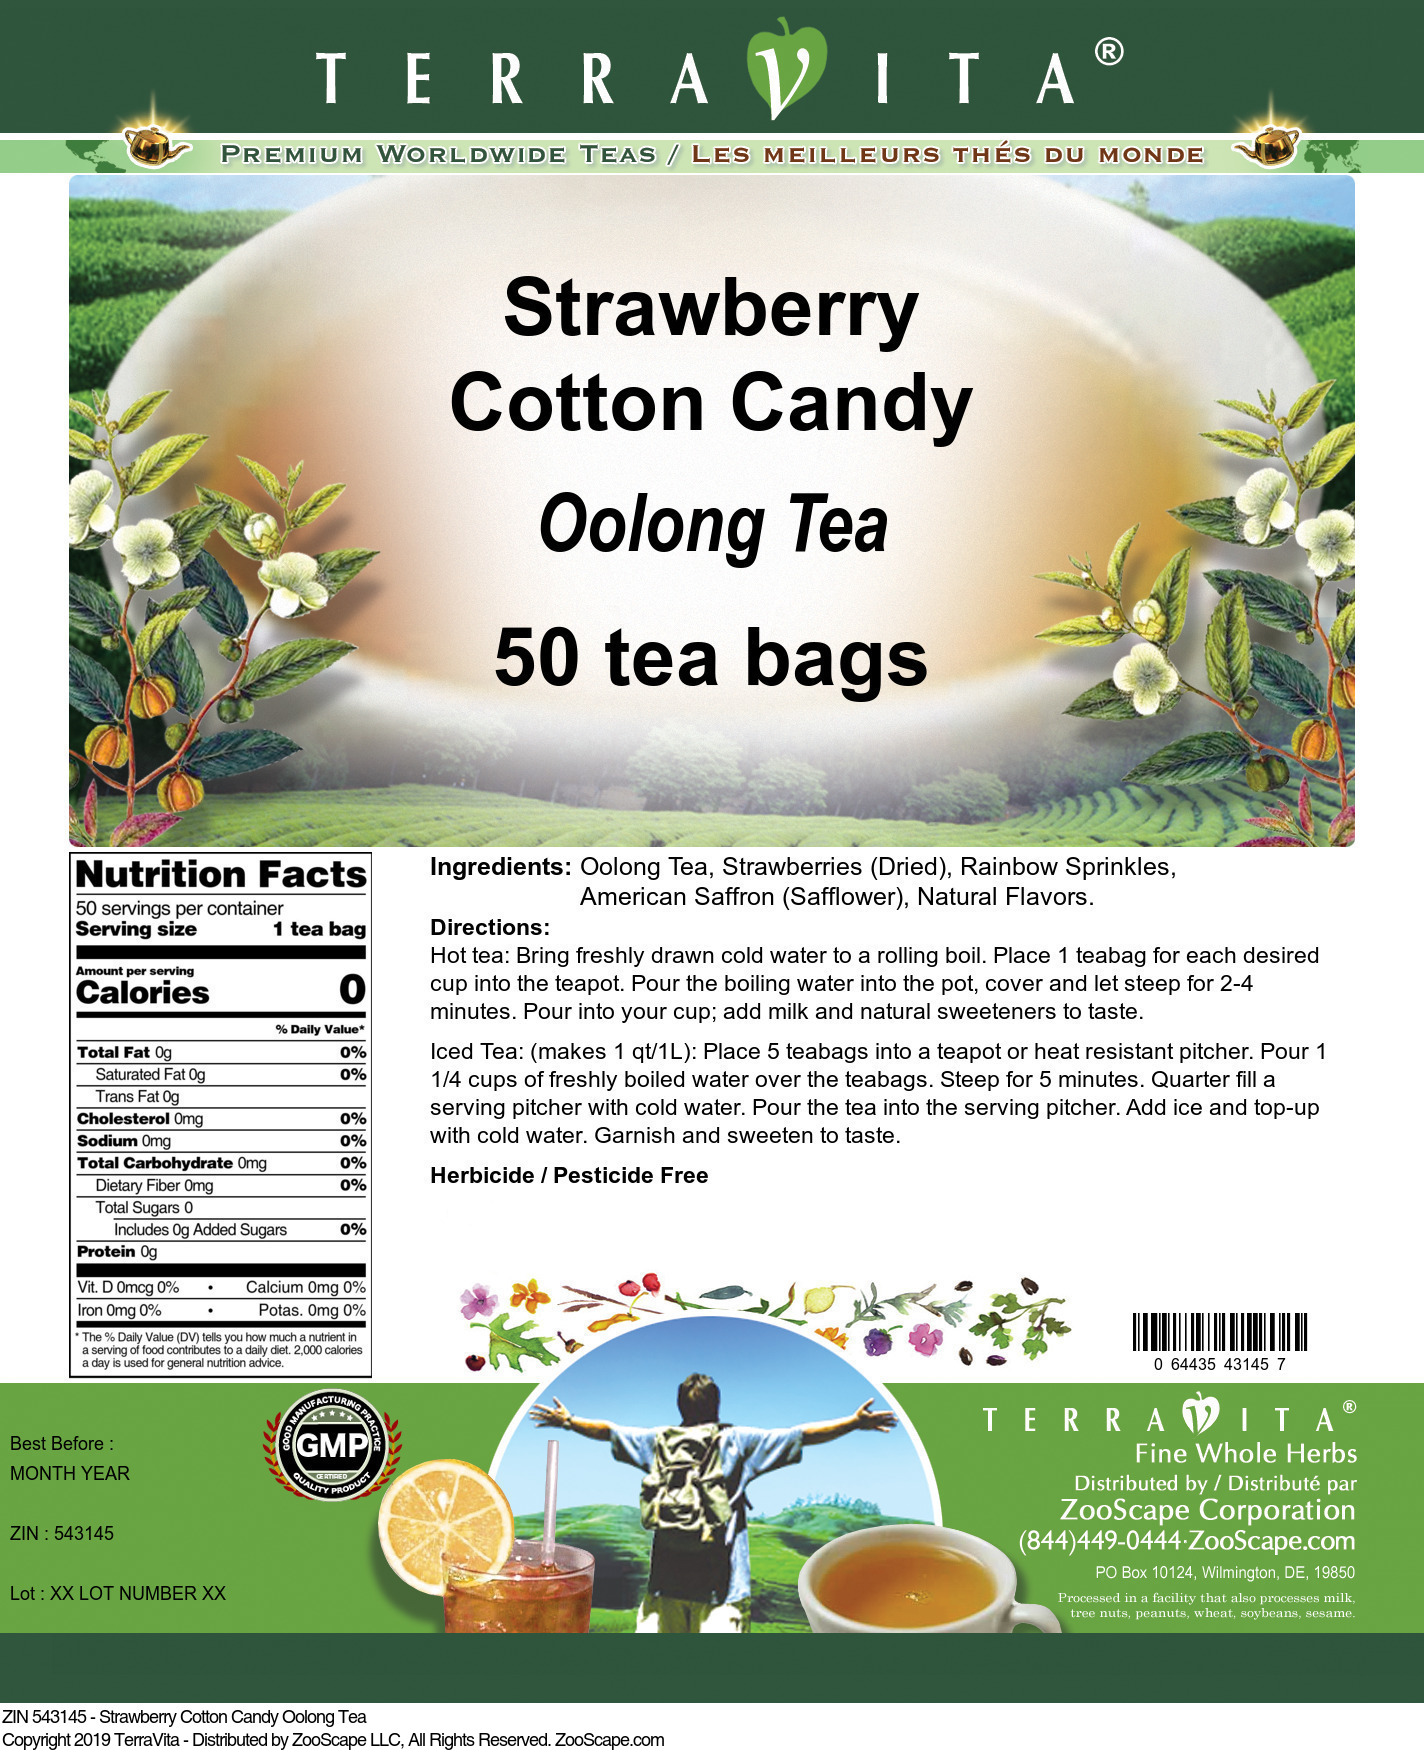 Strawberry Cotton Candy Oolong Tea - Label